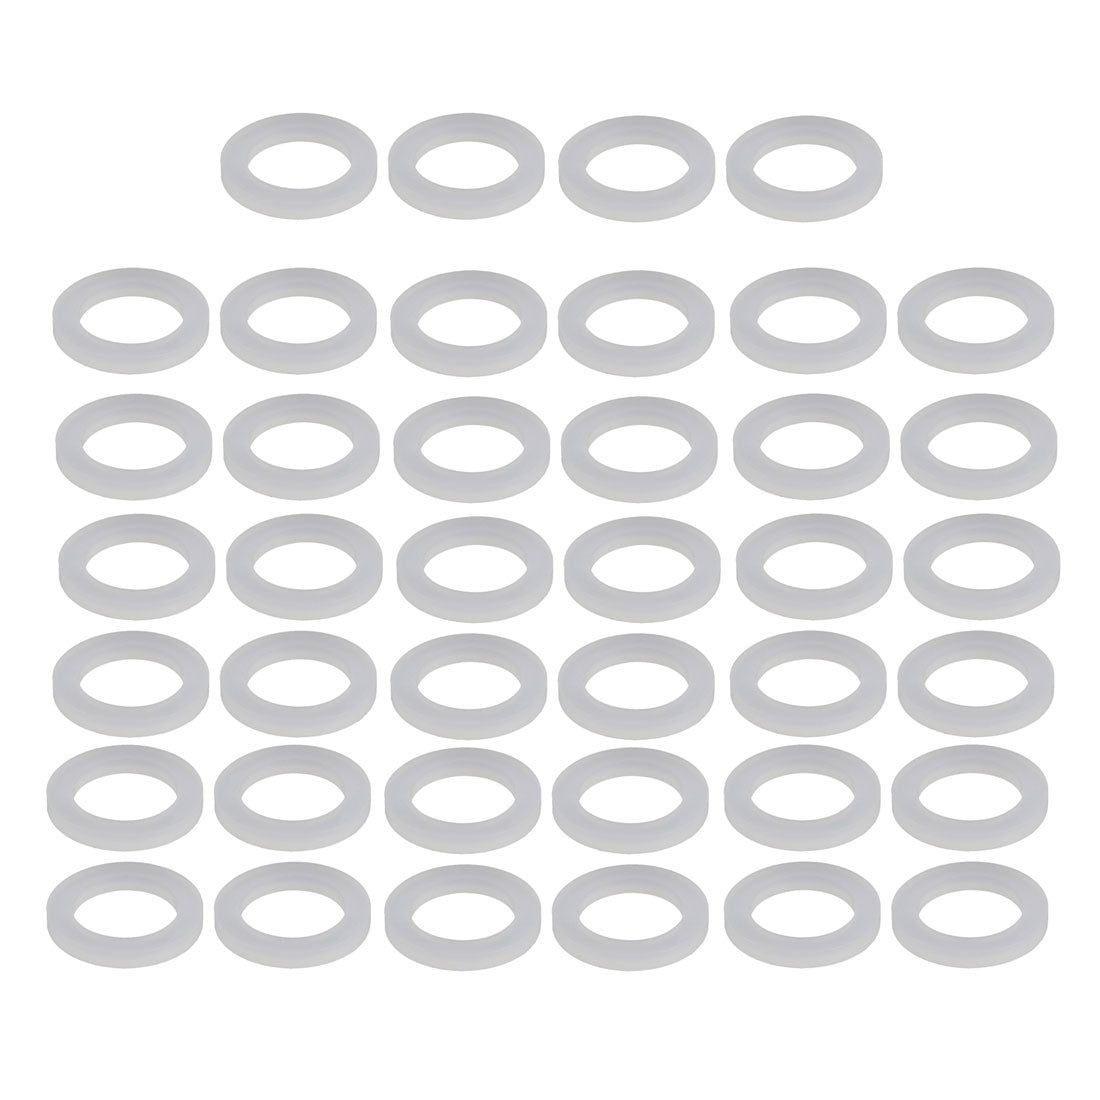 Uxcell Uxcell 40pcs Clear Silicone Round Flat Washer Assortment Size 16mmx24mmx3mm Flat Washer